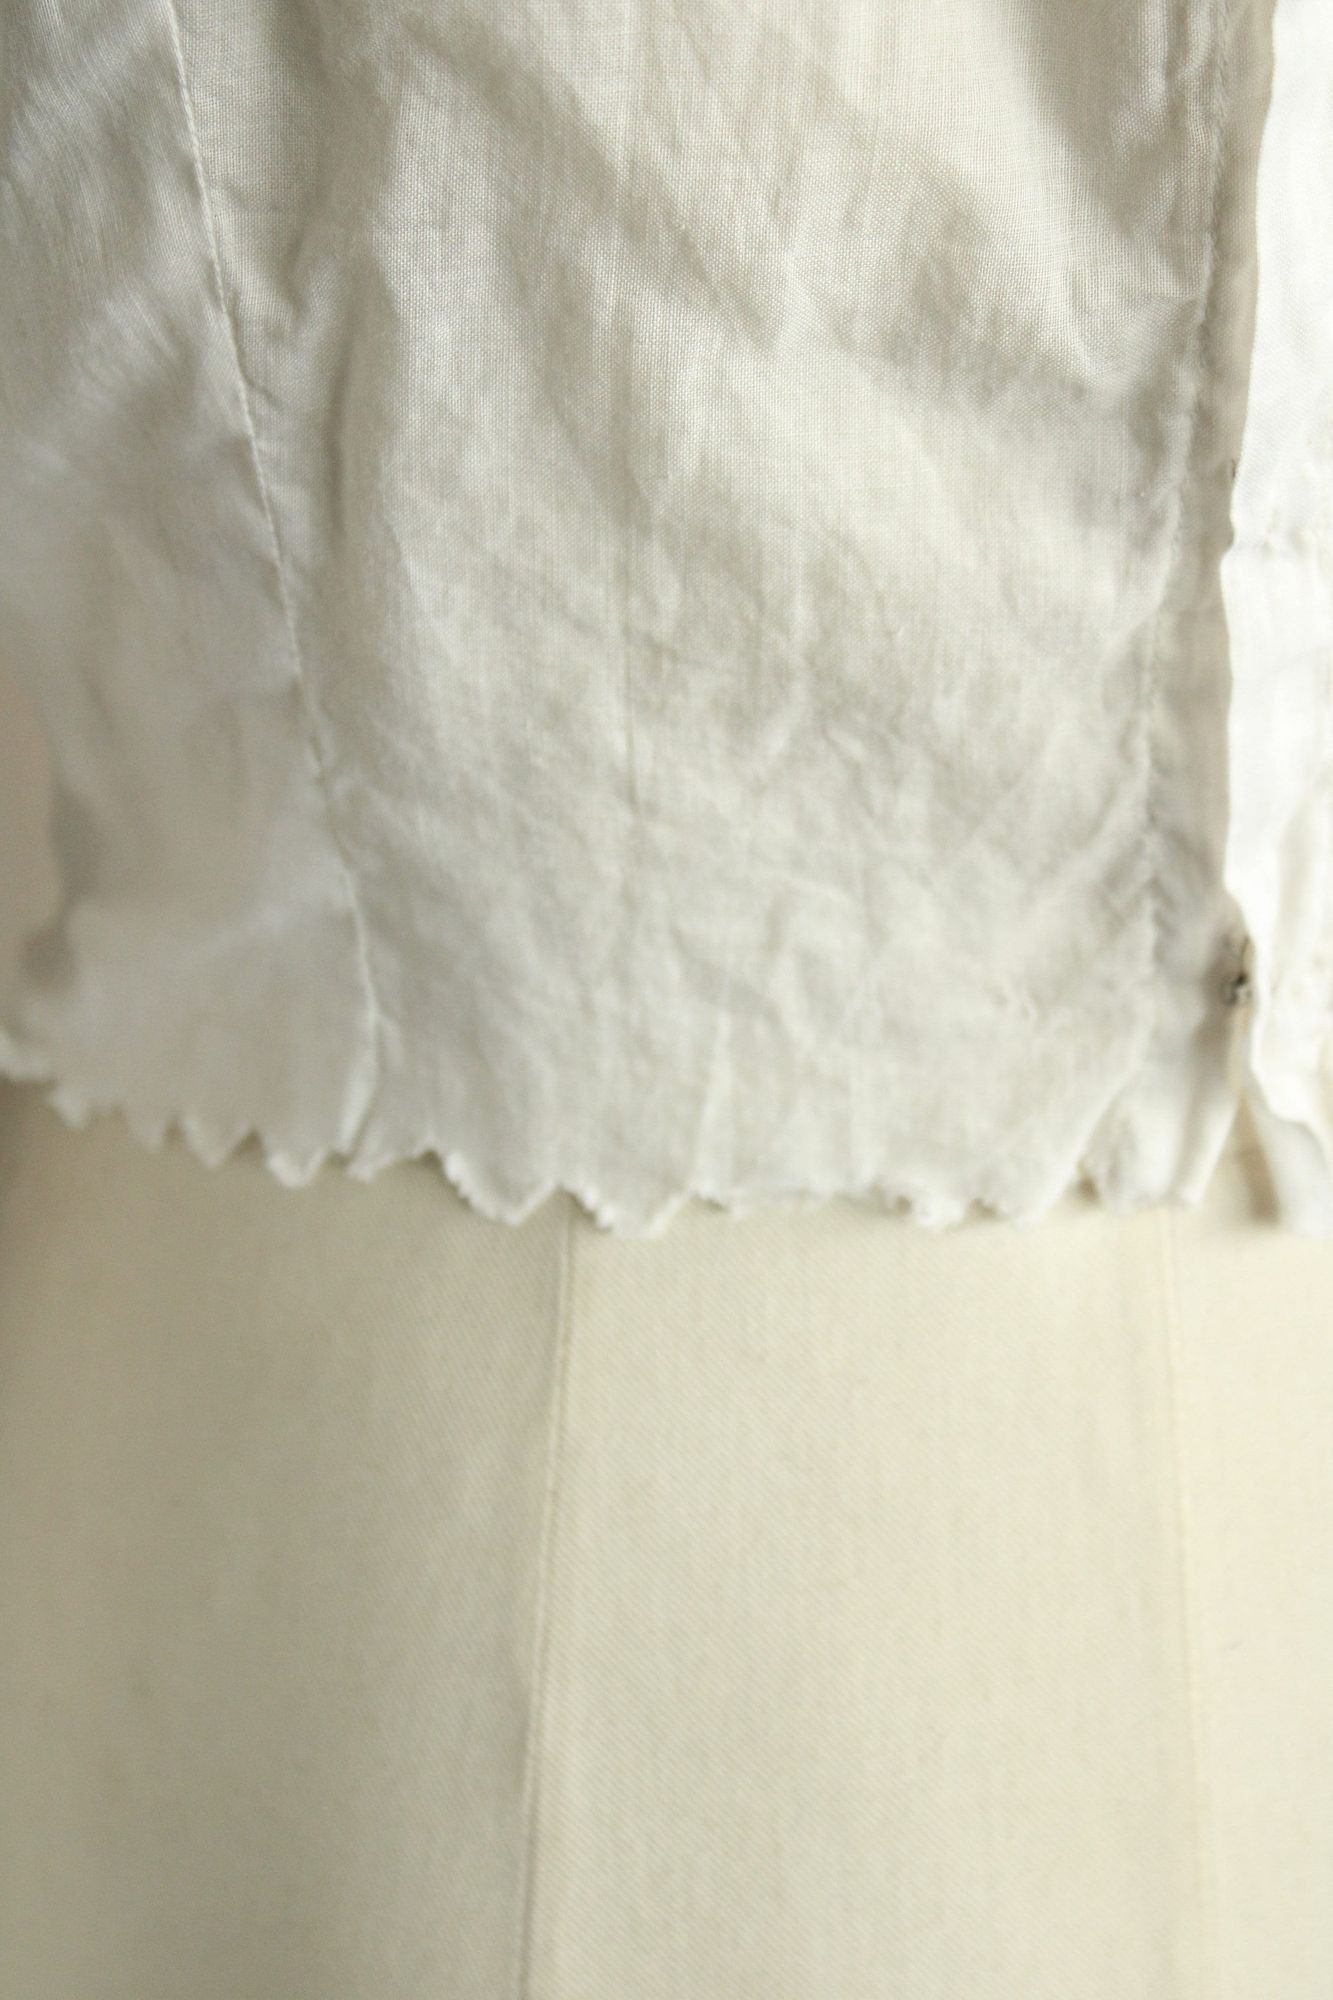 Vintage Antique 1900s Blouse In White With Lace Front. Pigeon Bust Size M / US 6-8 / IT 42-44 - 10 Preview